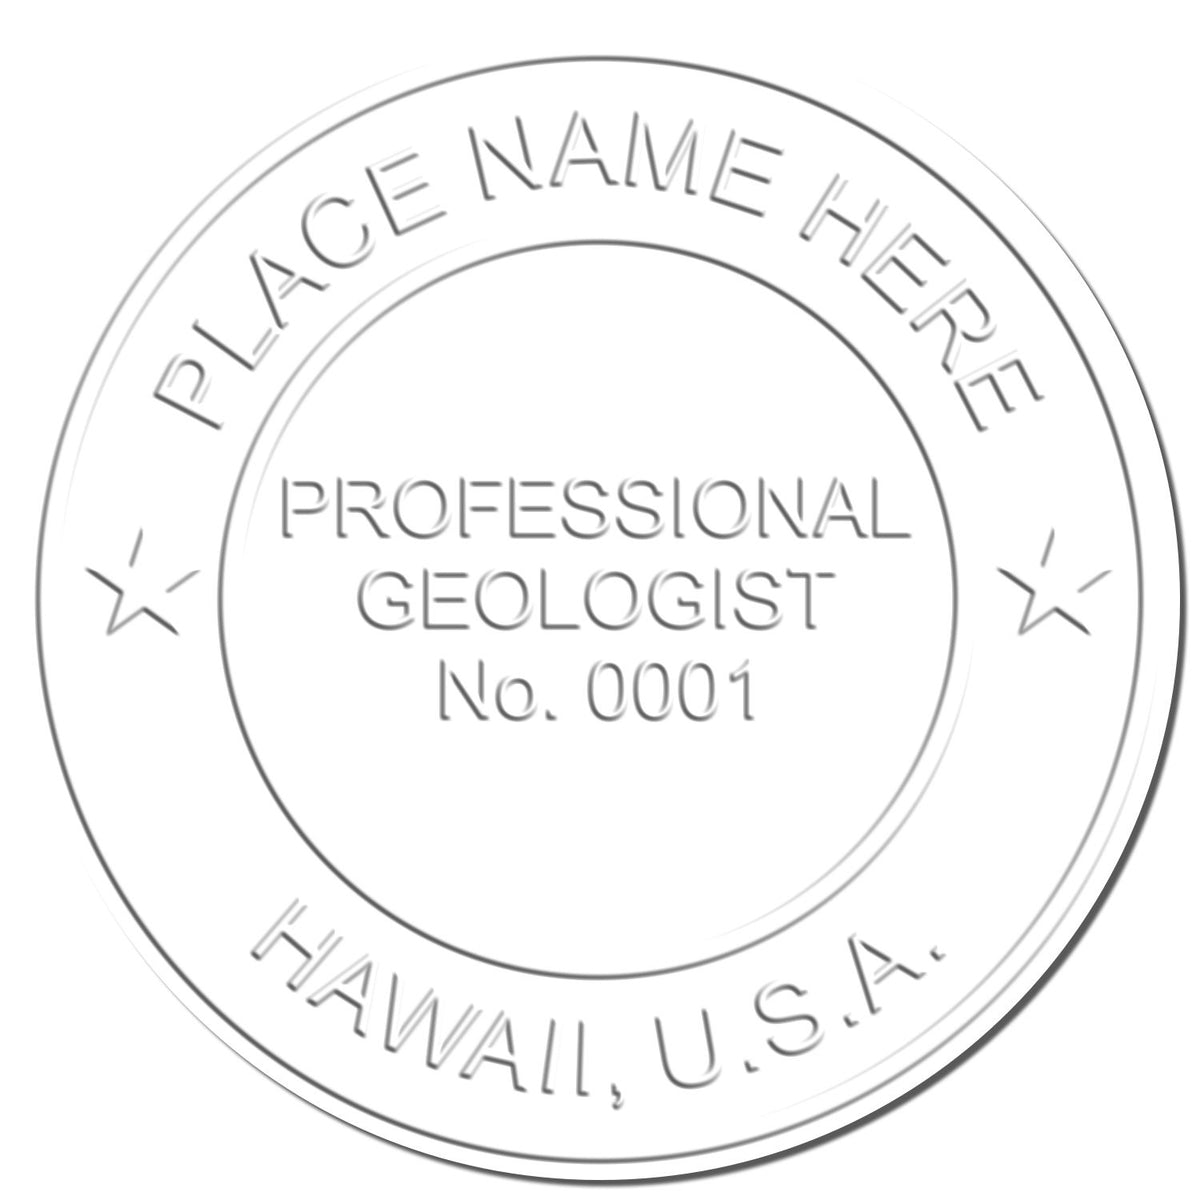 This paper is stamped with a sample imprint of the Handheld Hawaii Professional Geologist Embosser, signifying its quality and reliability.